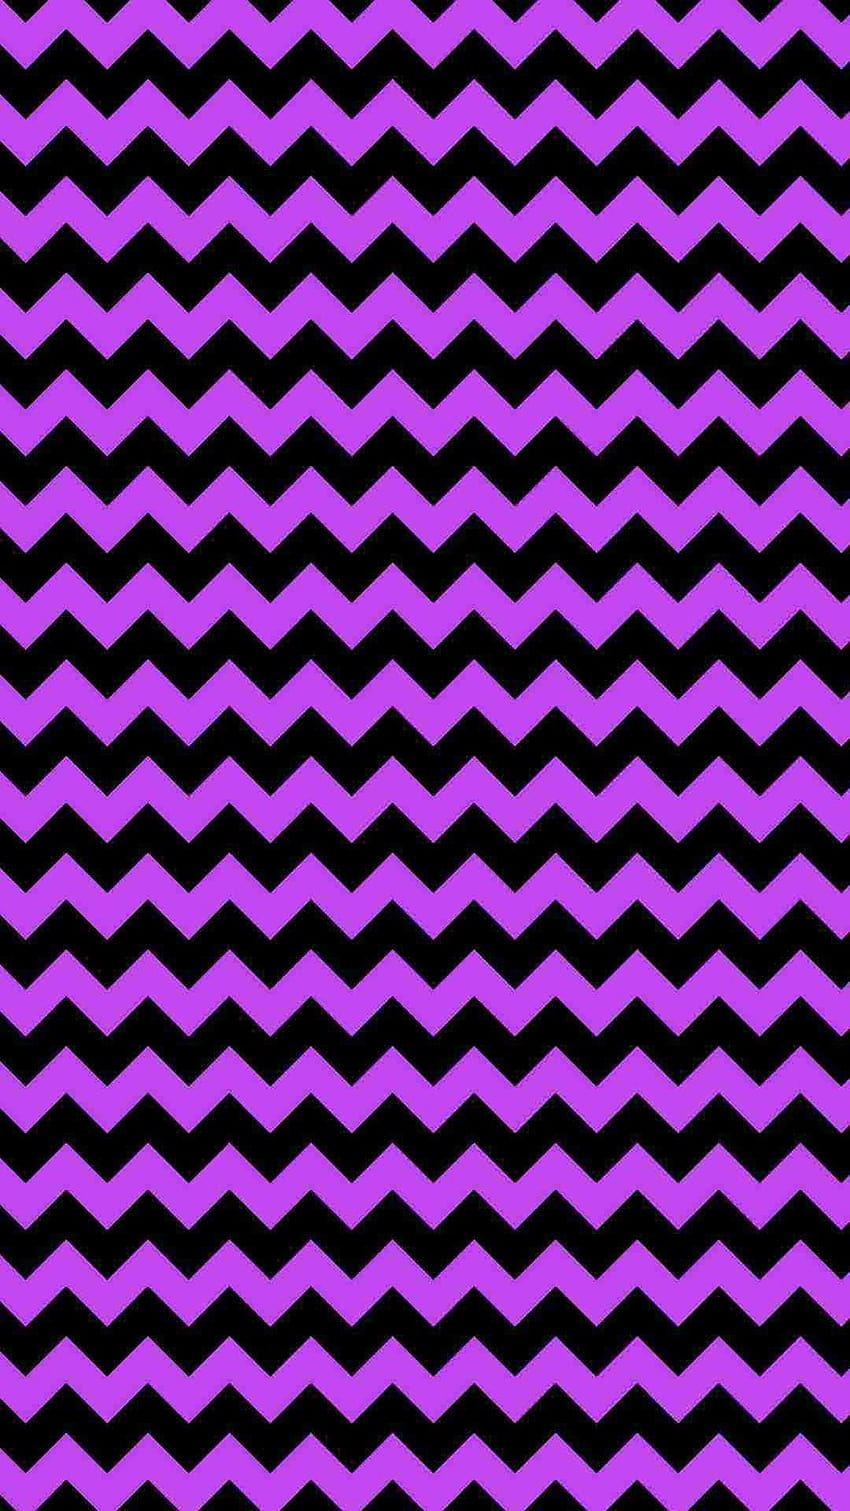 Zigzag Group with 62 items, zig zag HD phone wallpaper